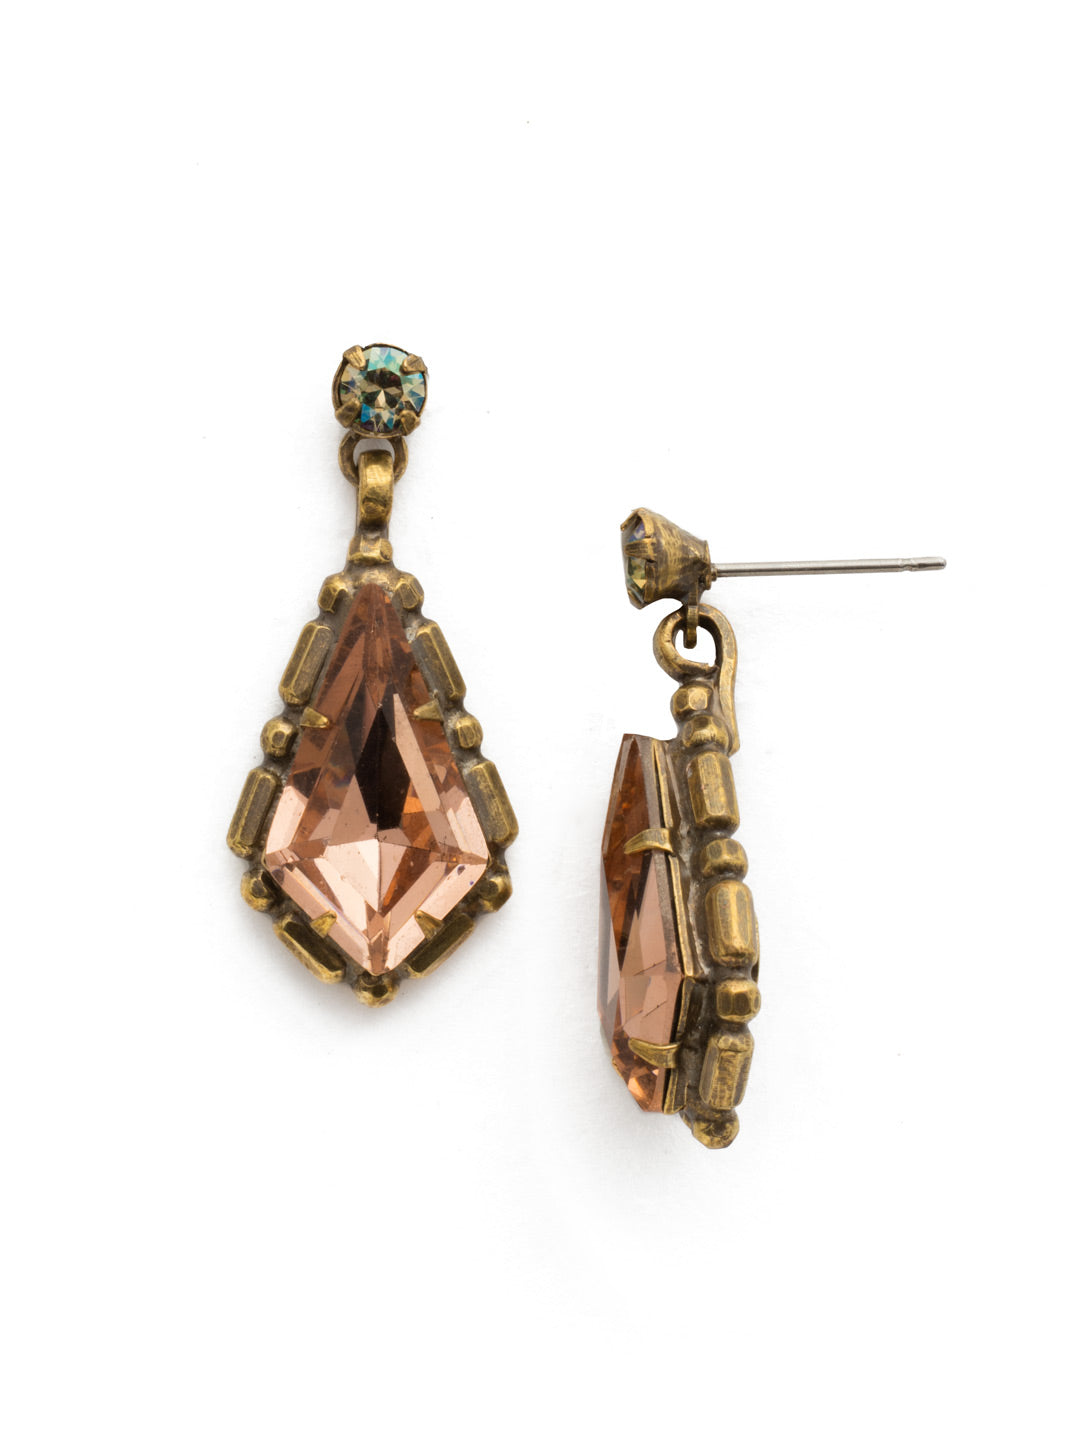 Hawthorn Dangle Earrings - EDX6AGSTN - A large diamond shaped stone in a detailed metal setting hangs from a rhinestone adorned post on this everyday stunner. From Sorrelli's Sandstone collection in our Antique Gold-tone finish.